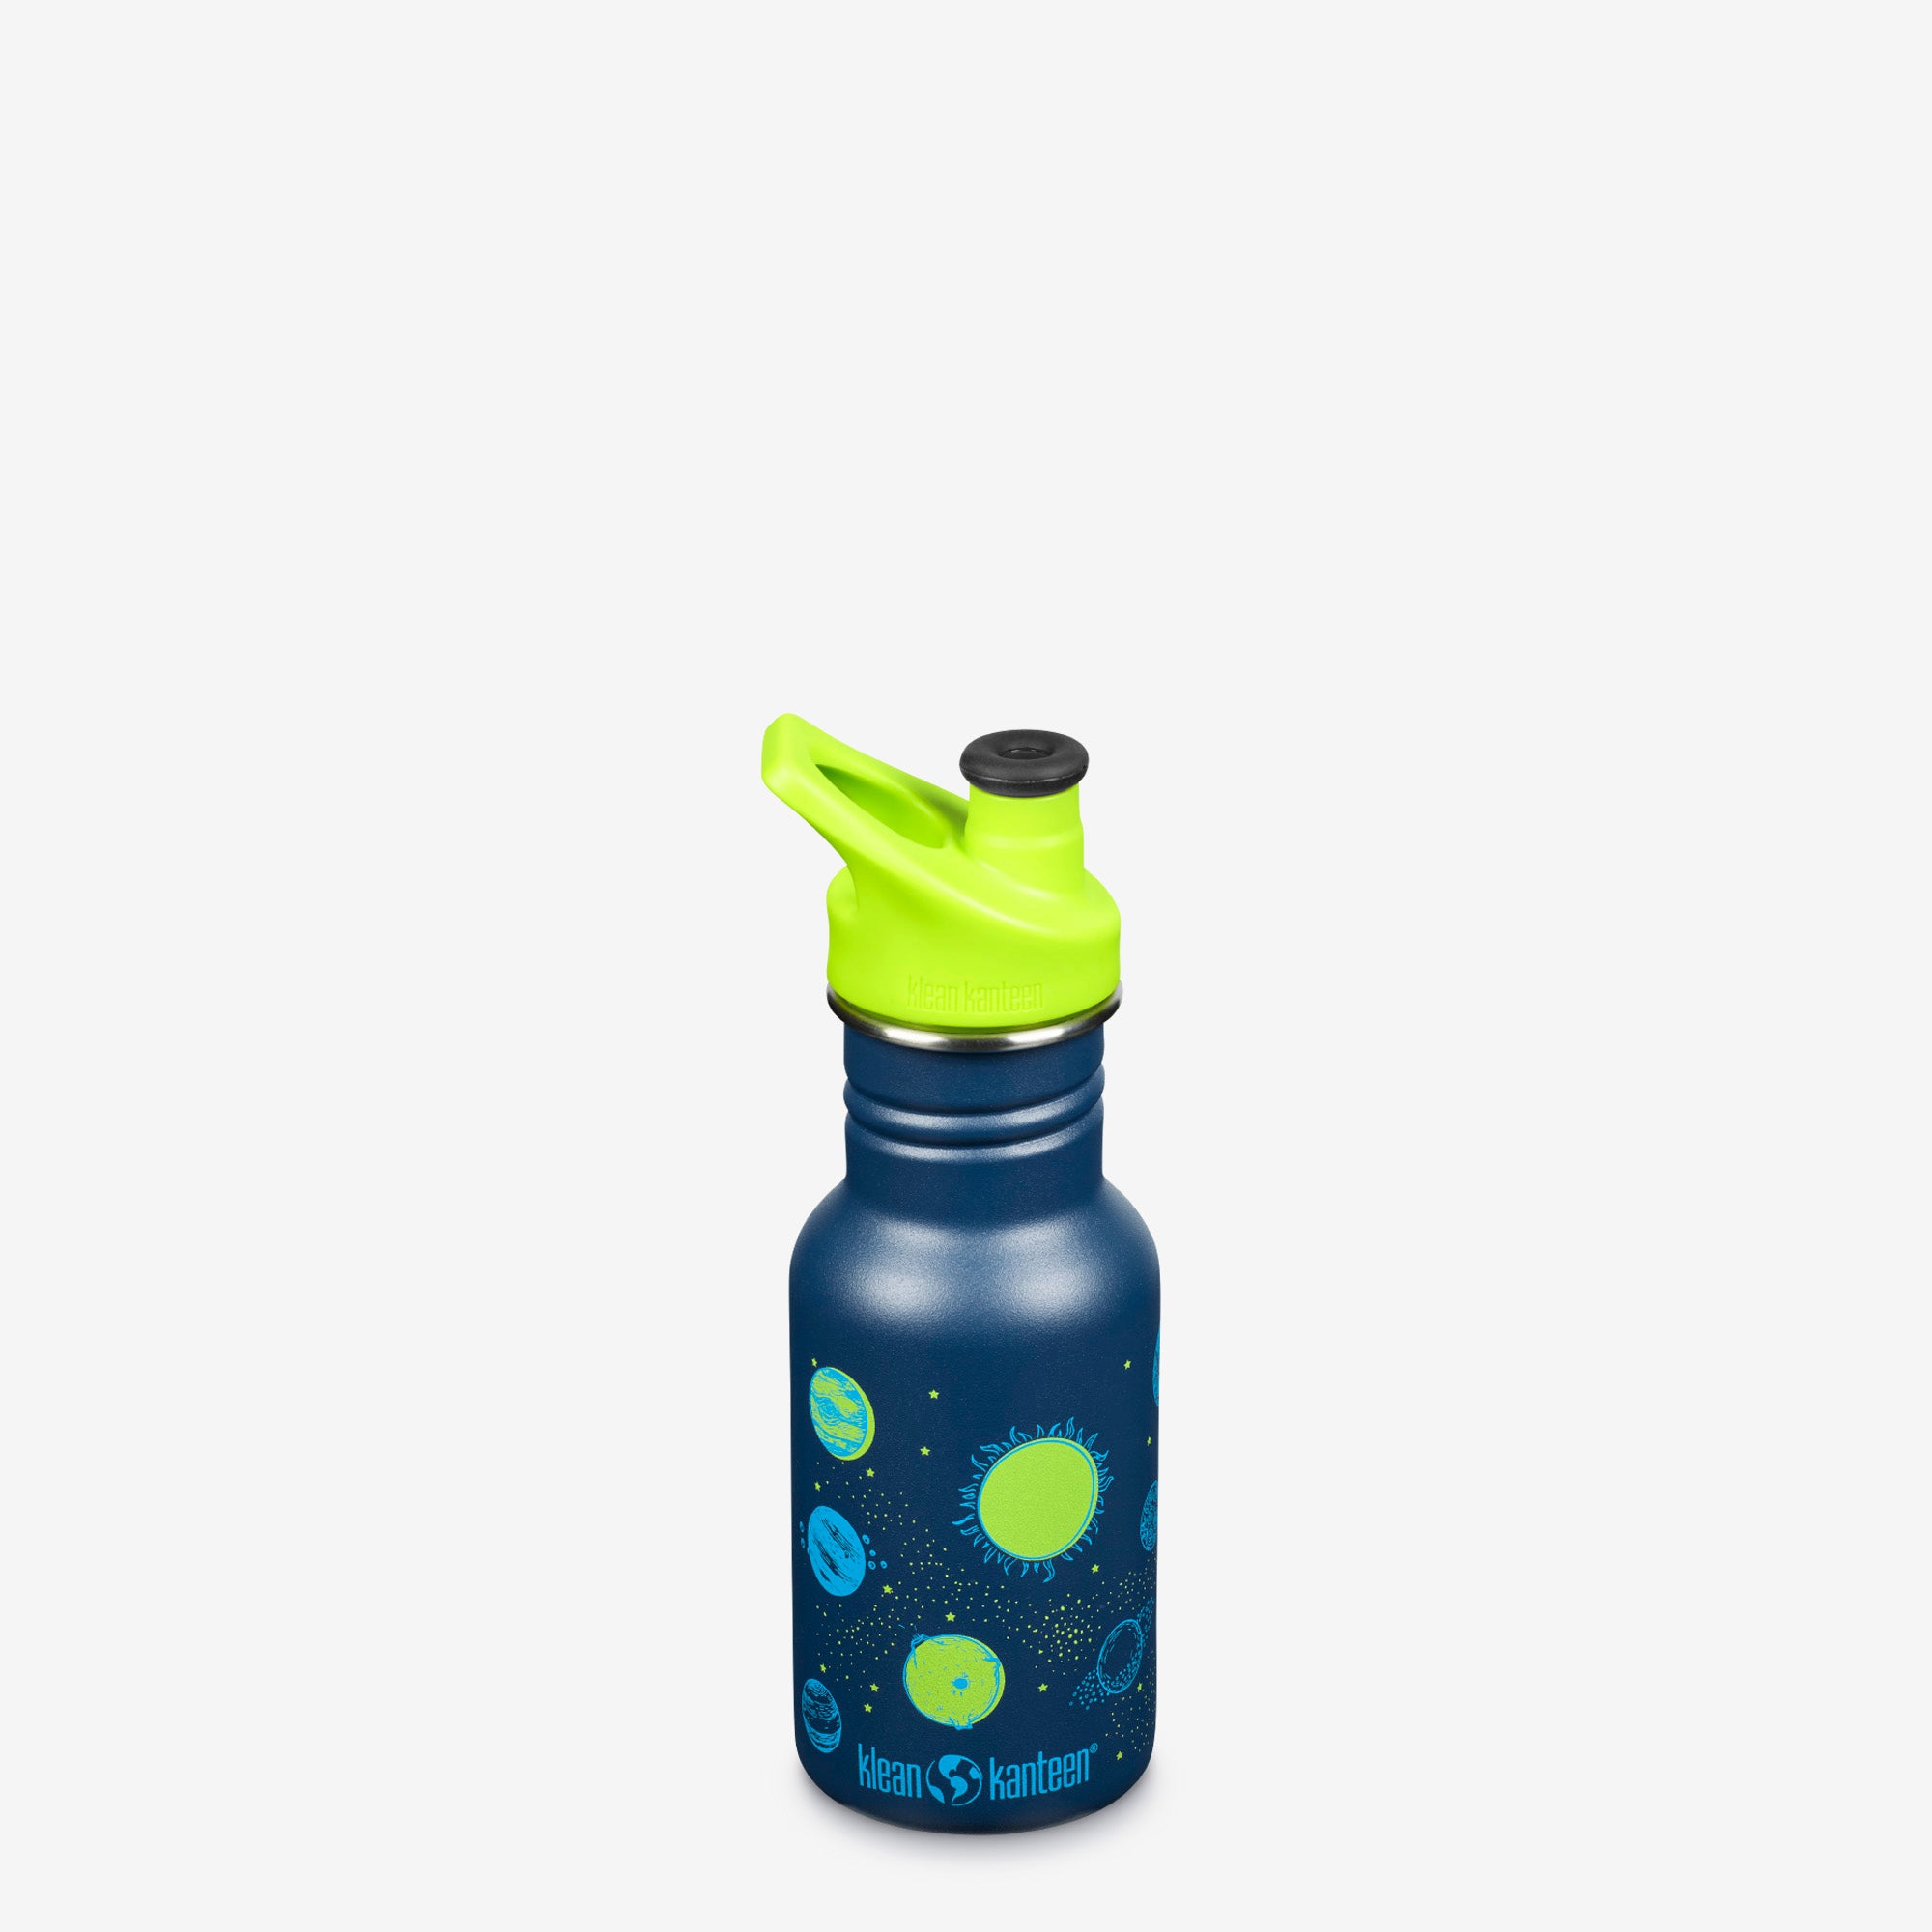 A small blue water bottle with a green sport top for kids.